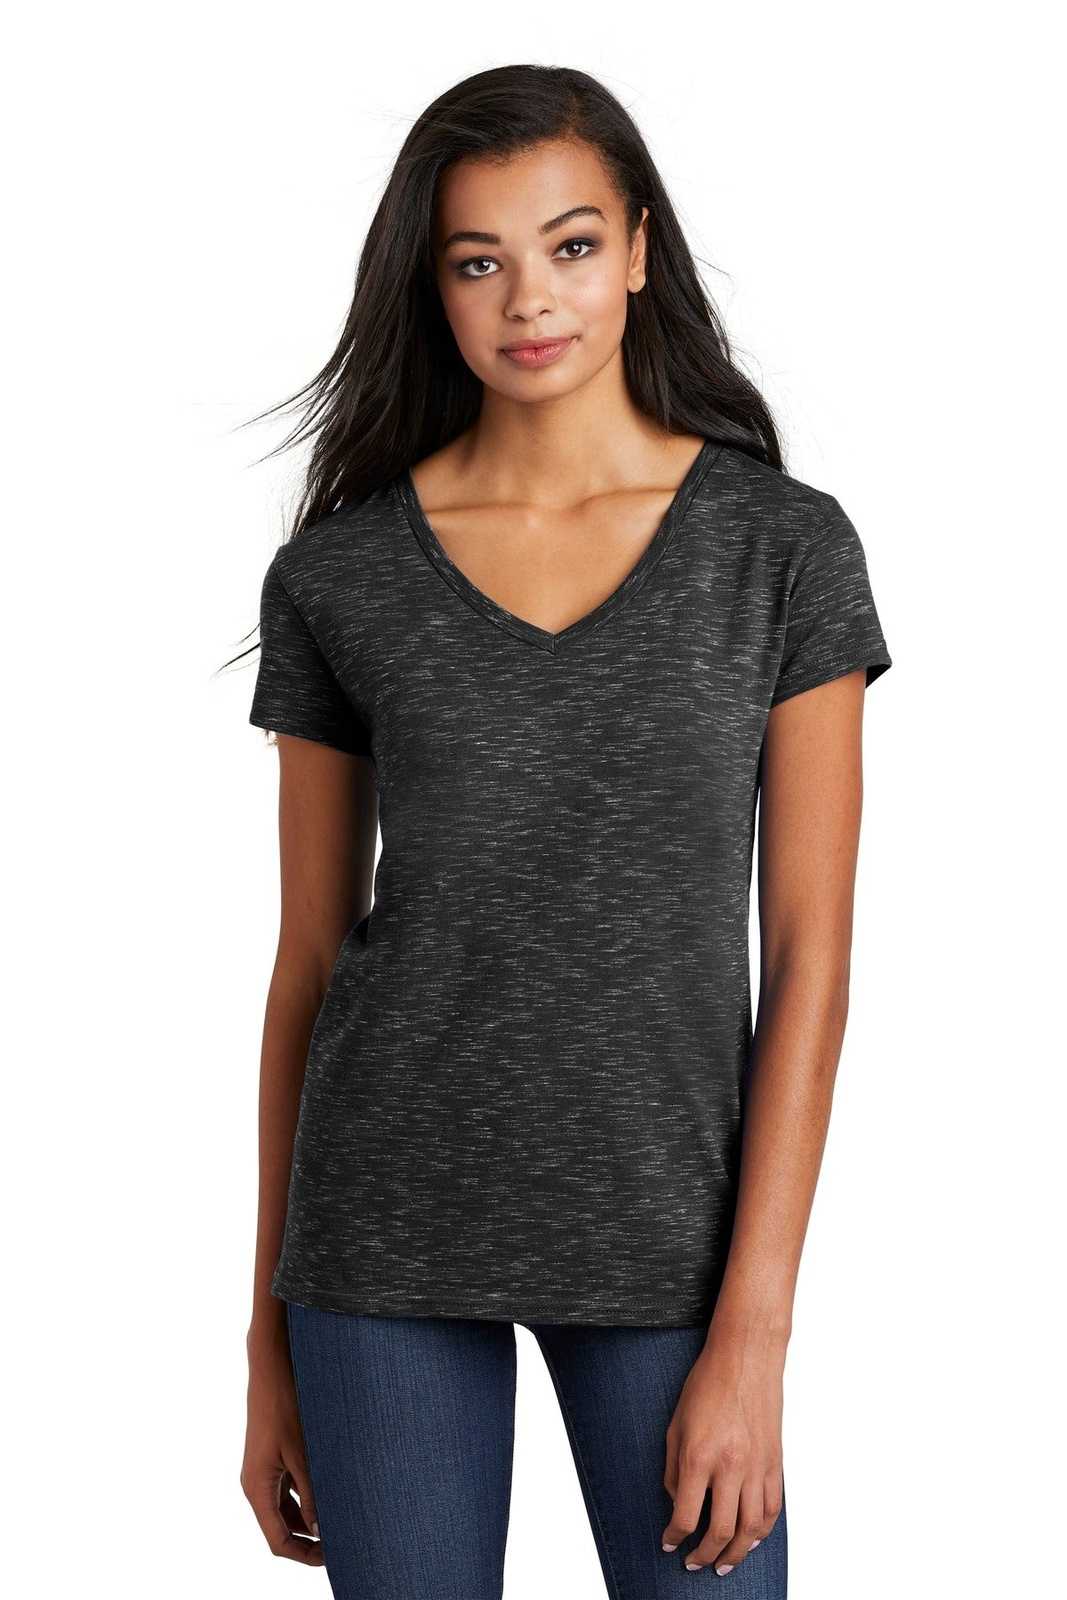 District DT664 Women's Medal V-Neck Tee - Black - HIT a Double - 1